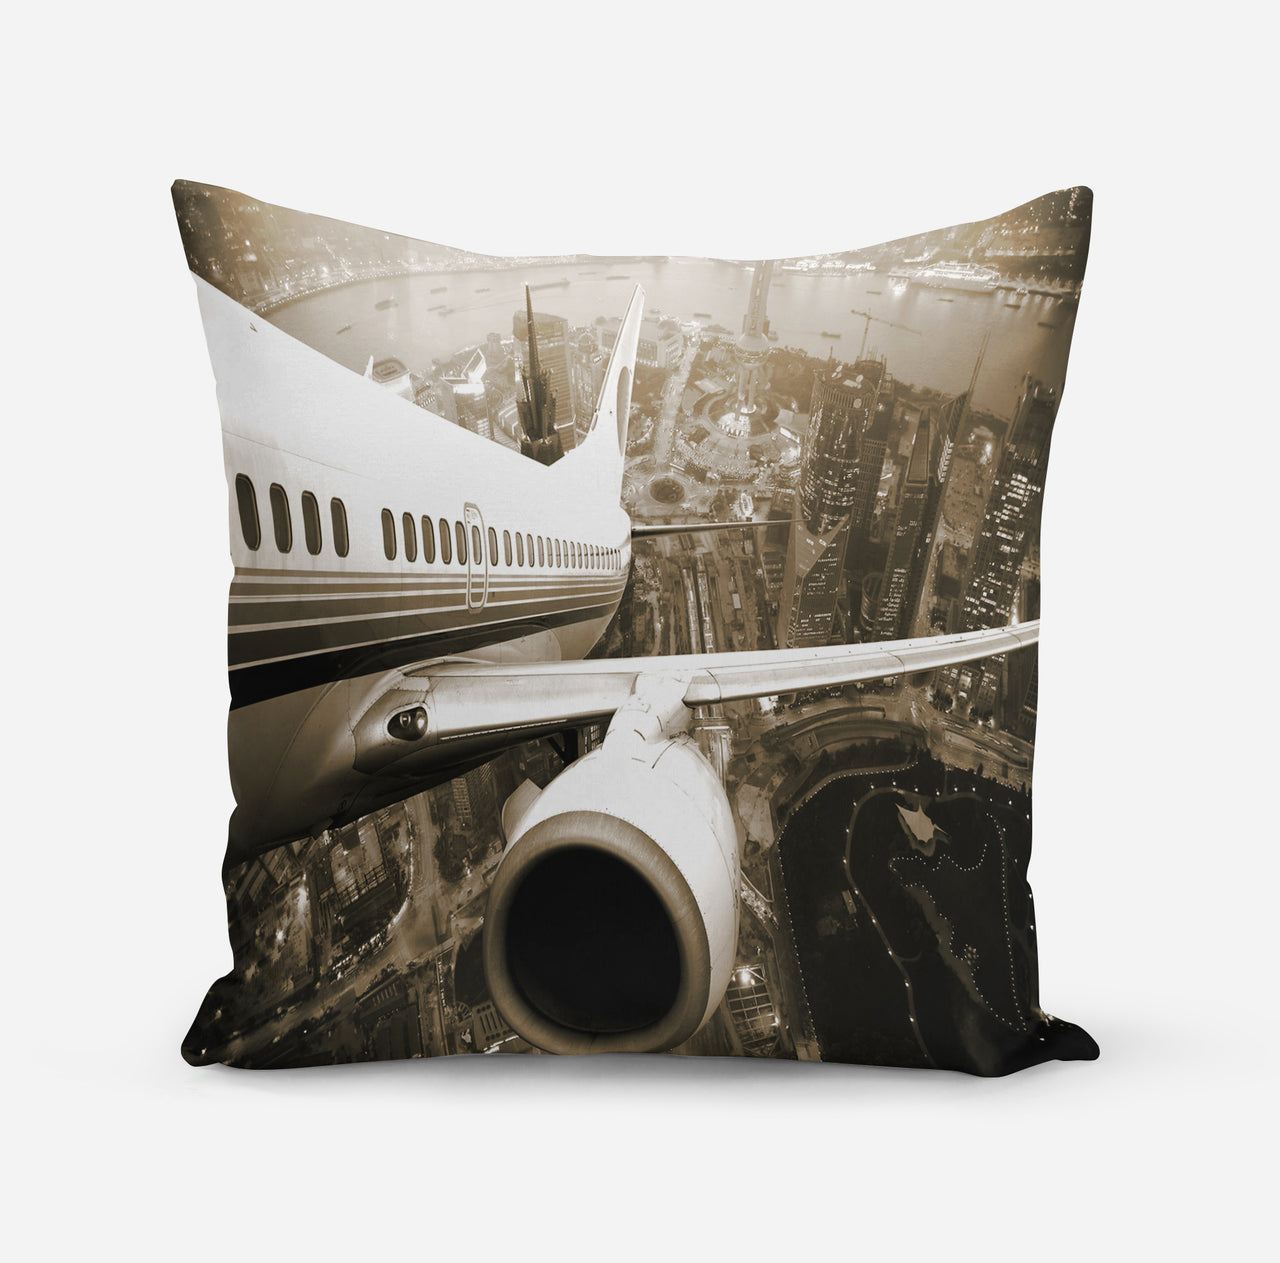 Departing Aircraft & City Scene behind Designed Pillows